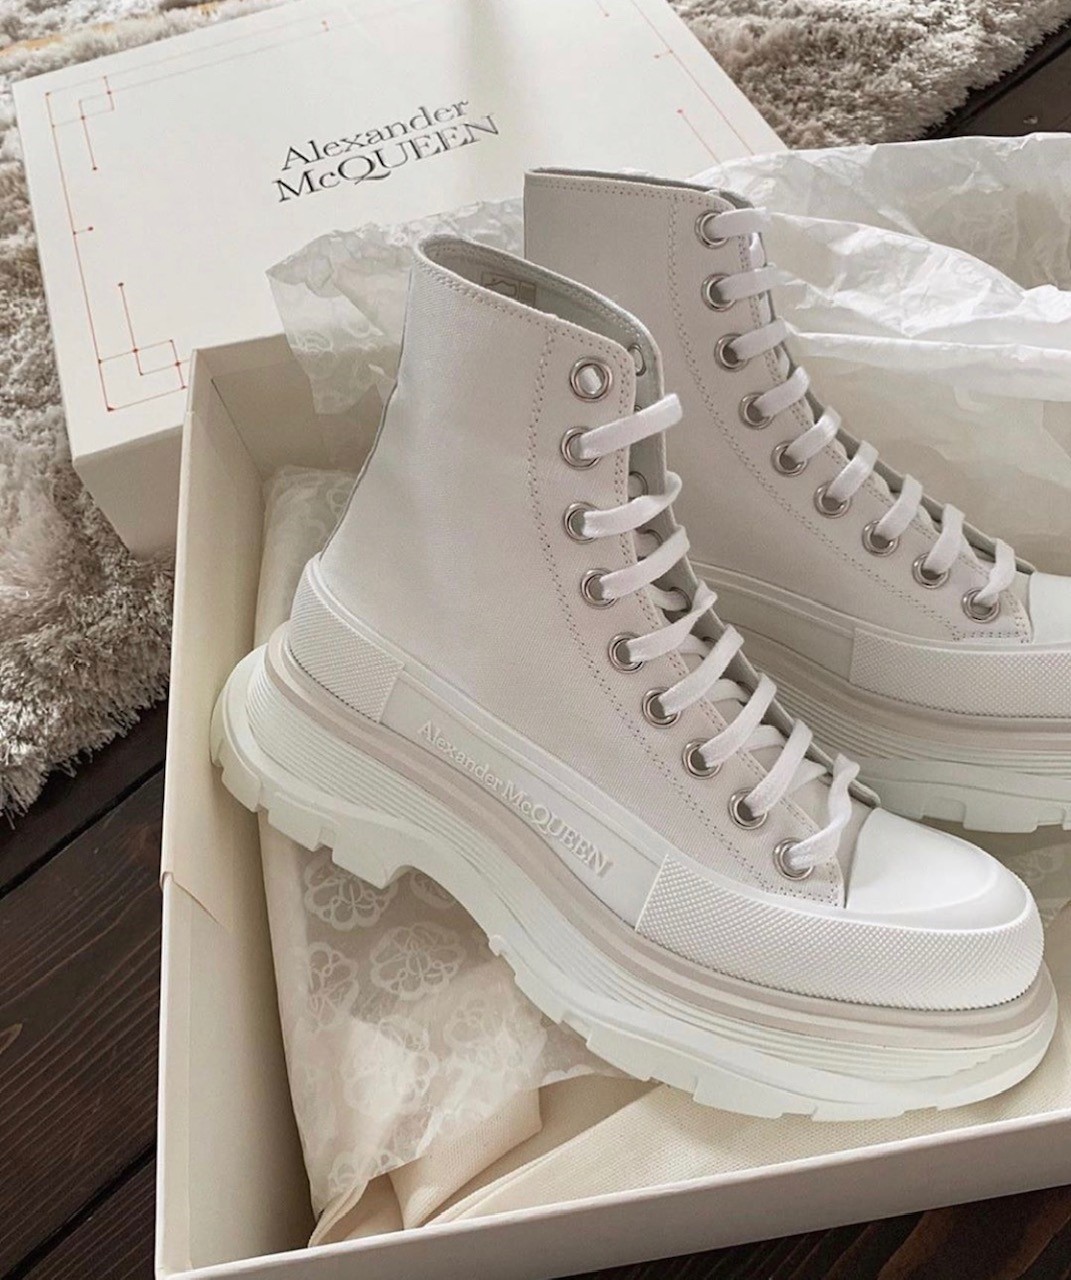 Bomb_Product_of_the_Day_Alexander_McQueen_Tread_Slick_Boots_2